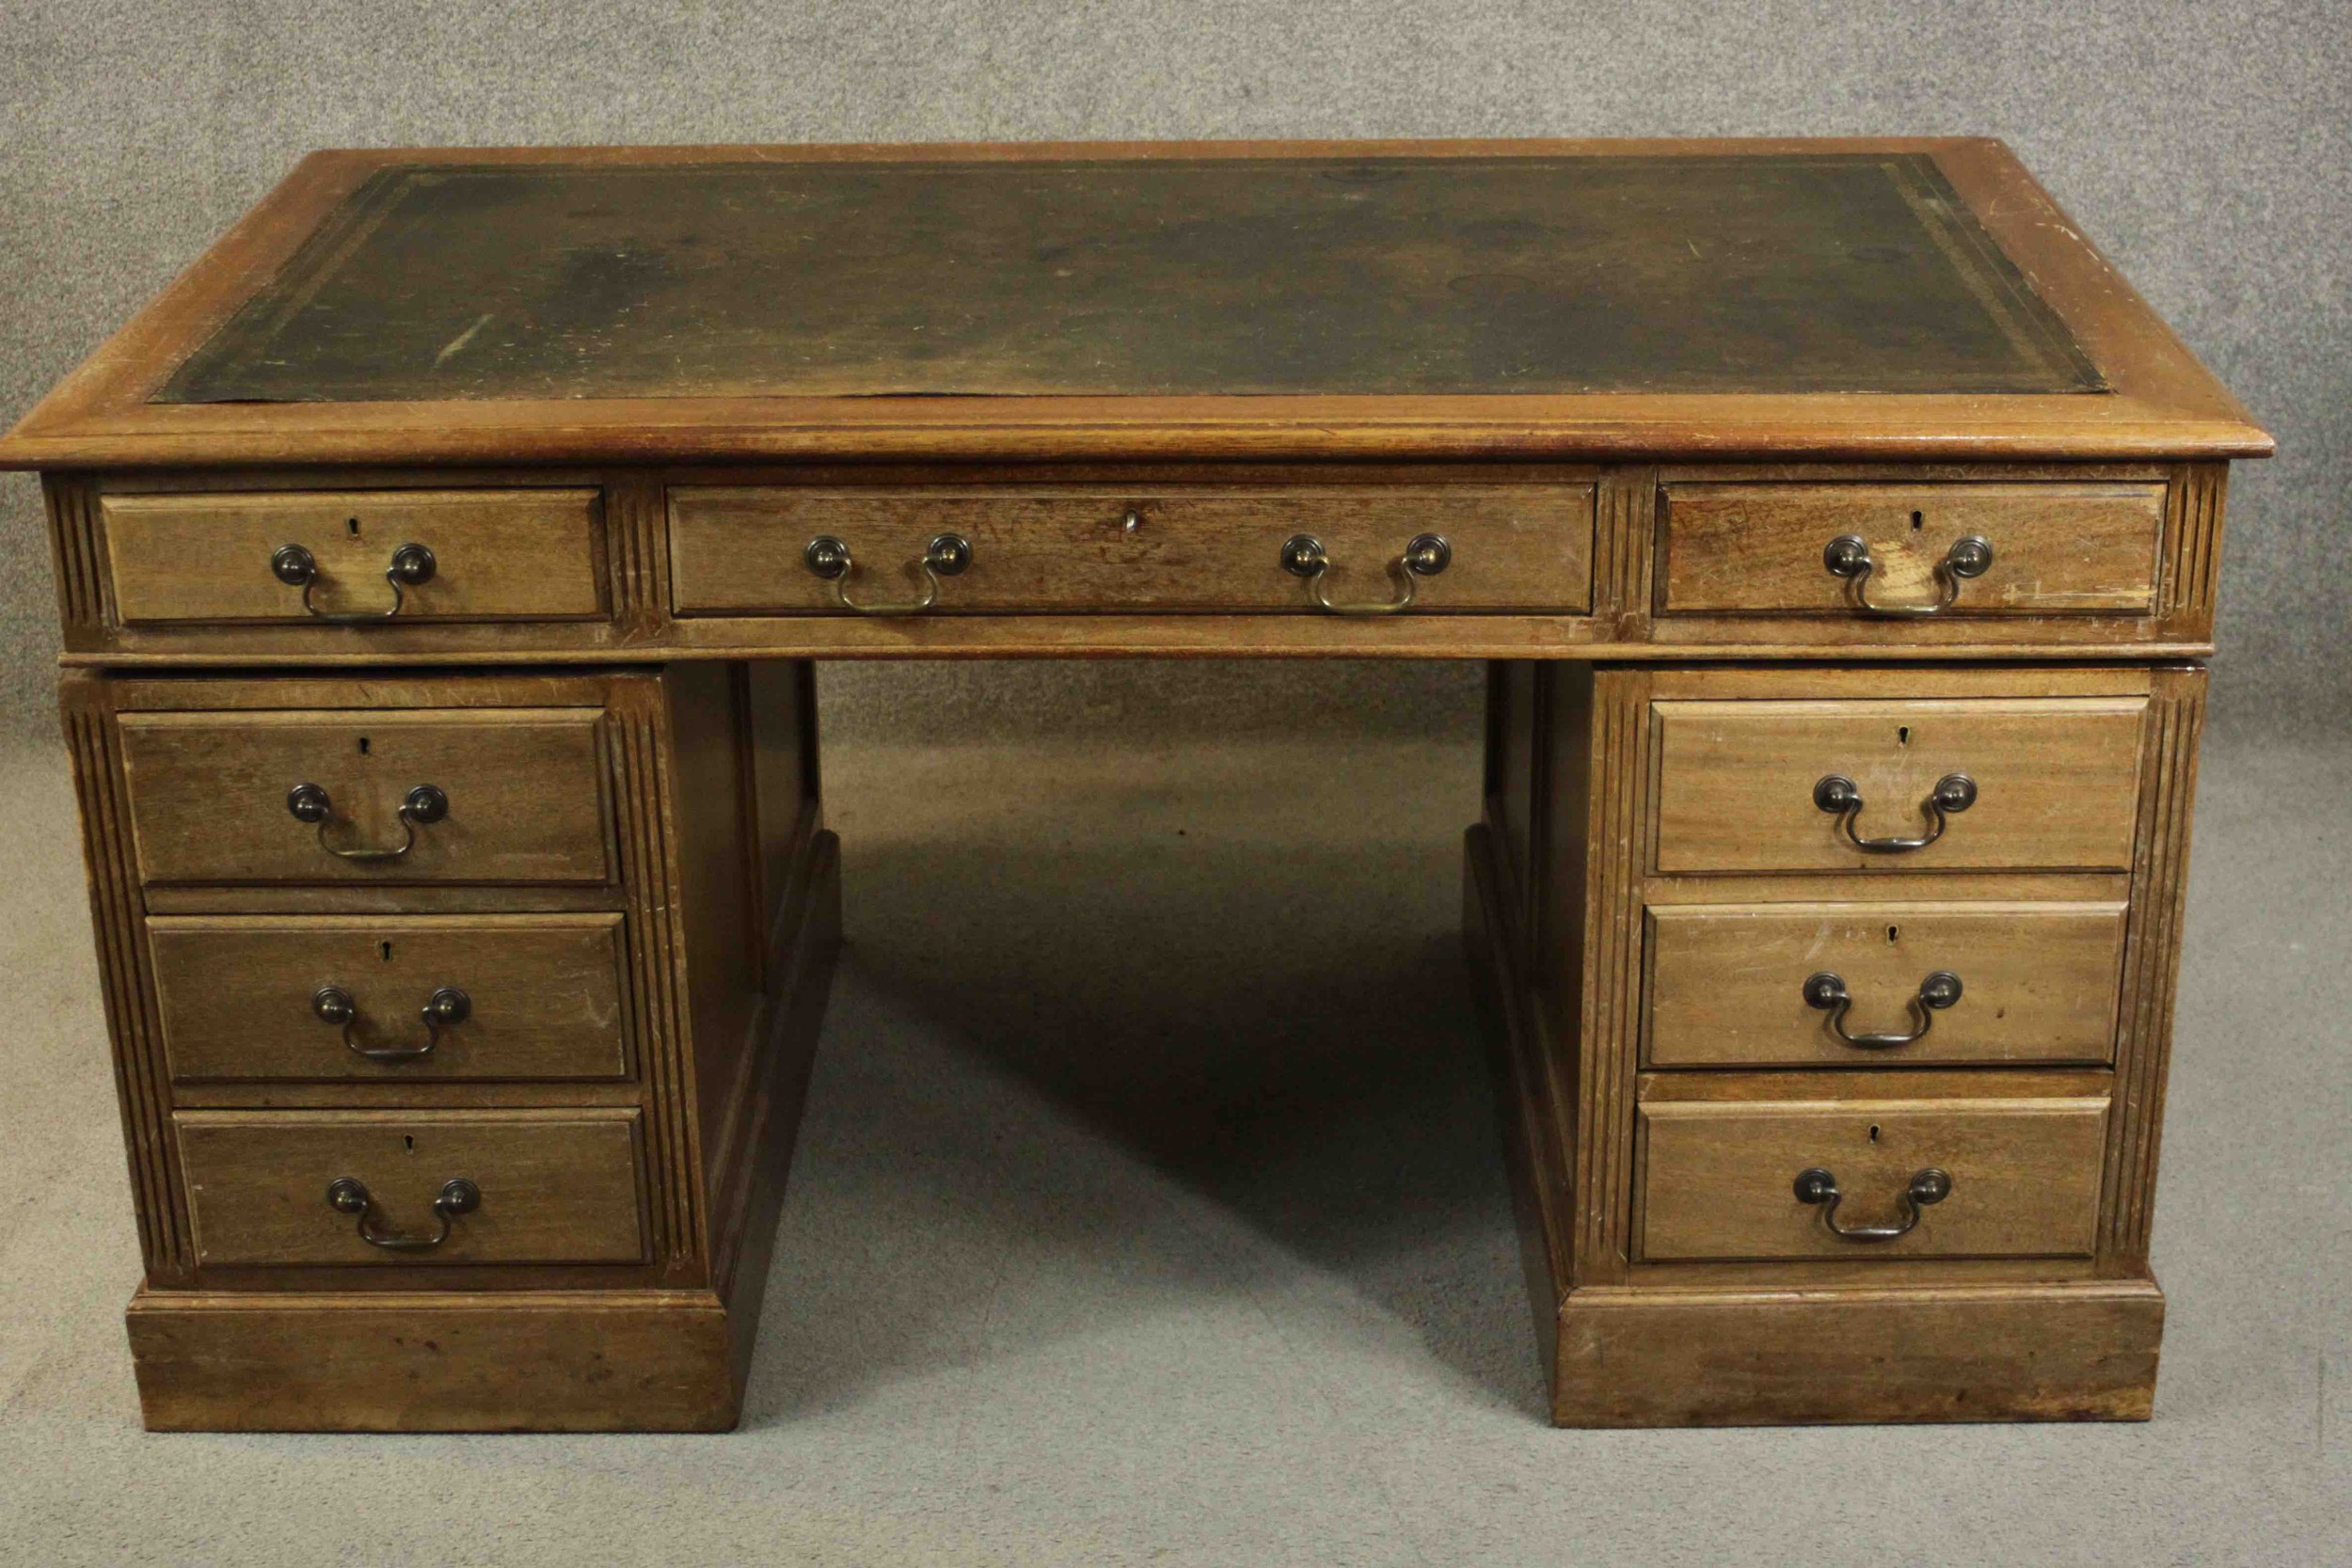 An early 20th century pedestal desk, with a leather writing insert over an arrangement of nine